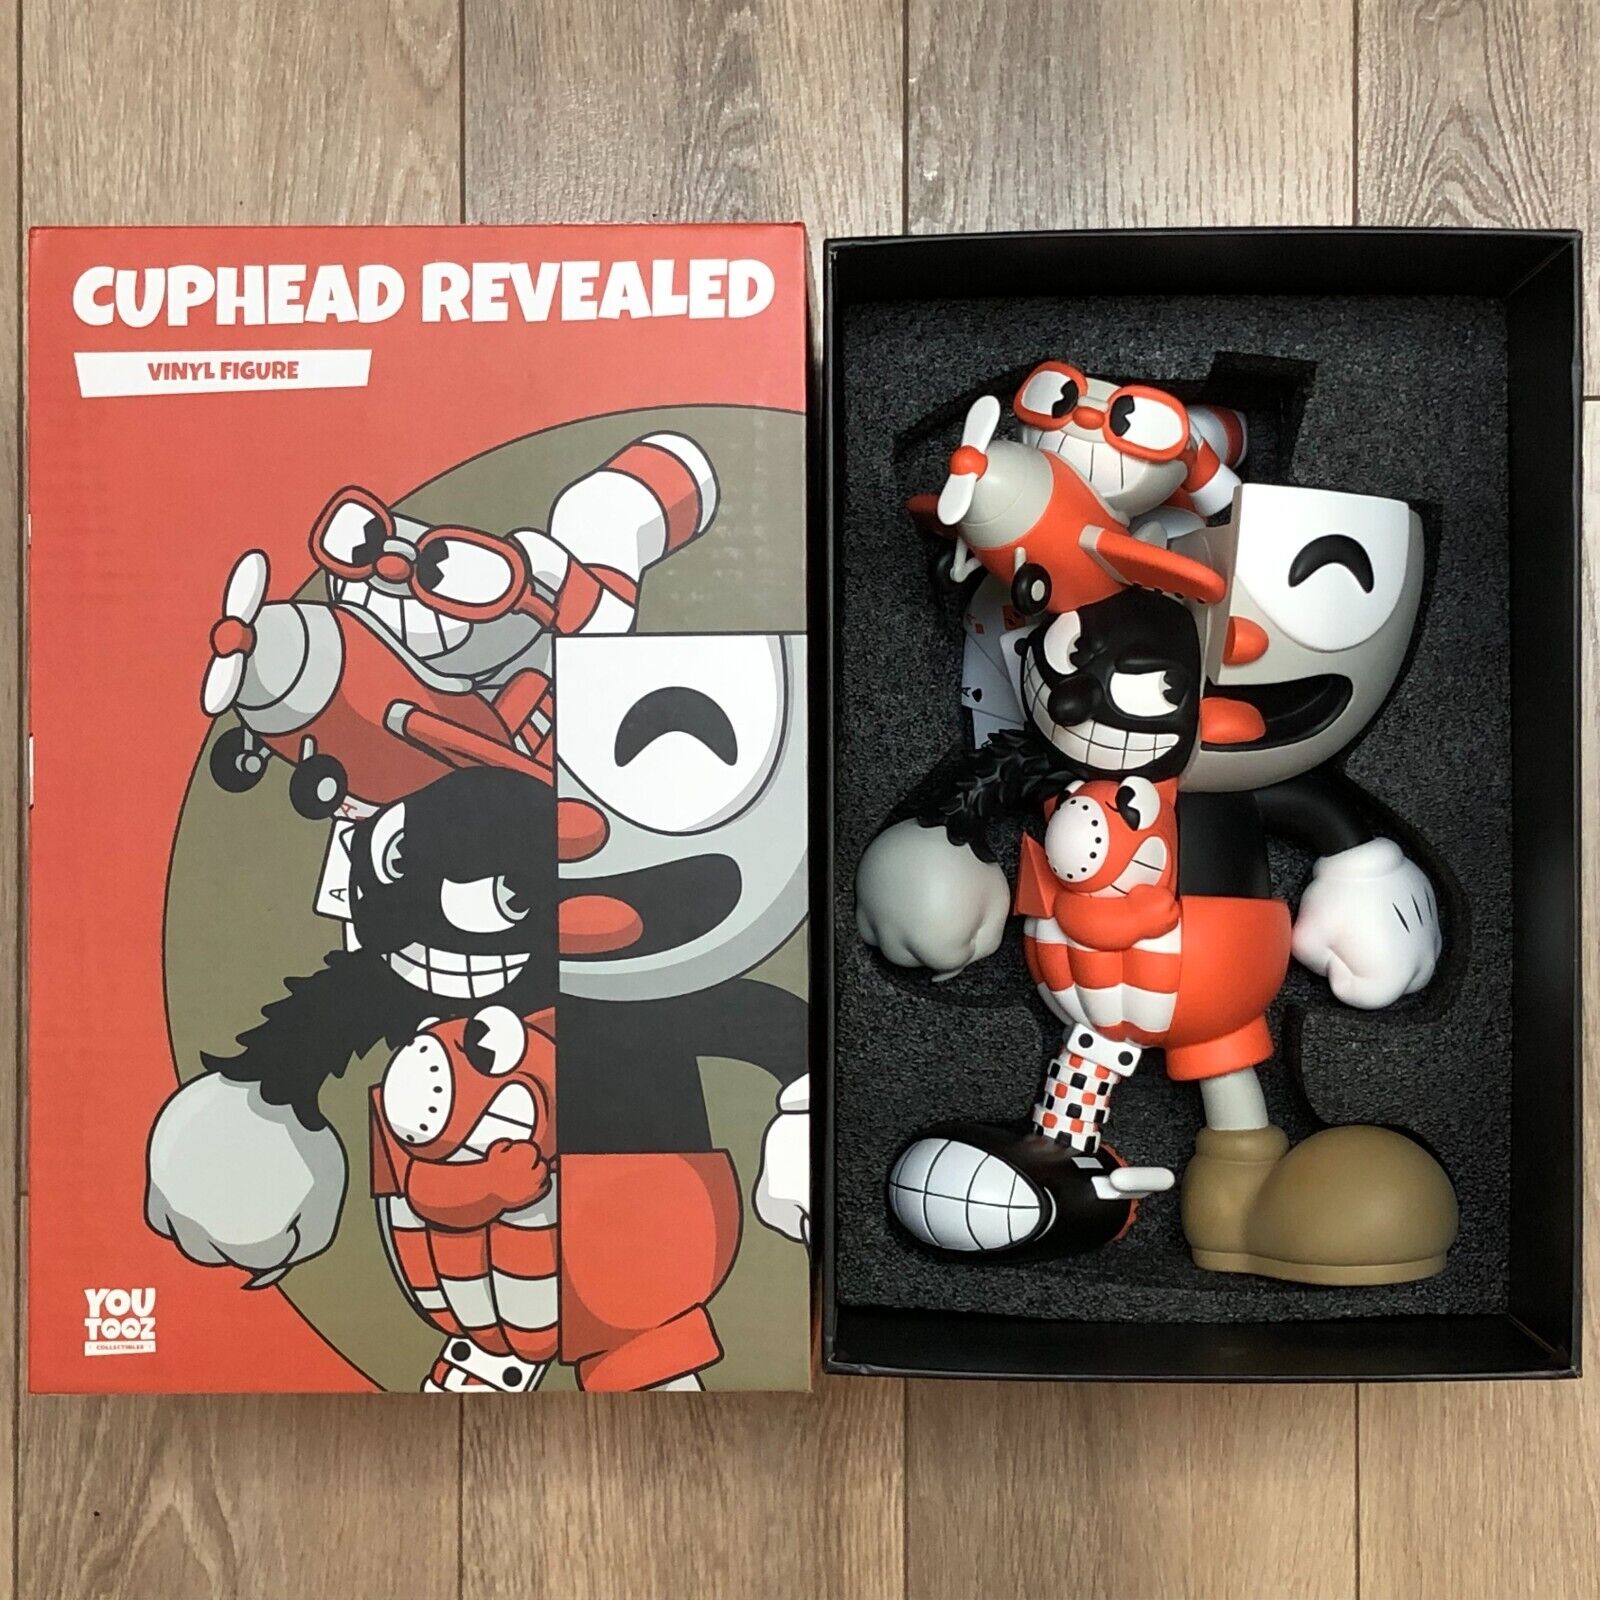 Youtooz Cuphead Revealed Limited Edition 500 Pieces 1ft Vinyl Figure Collectable